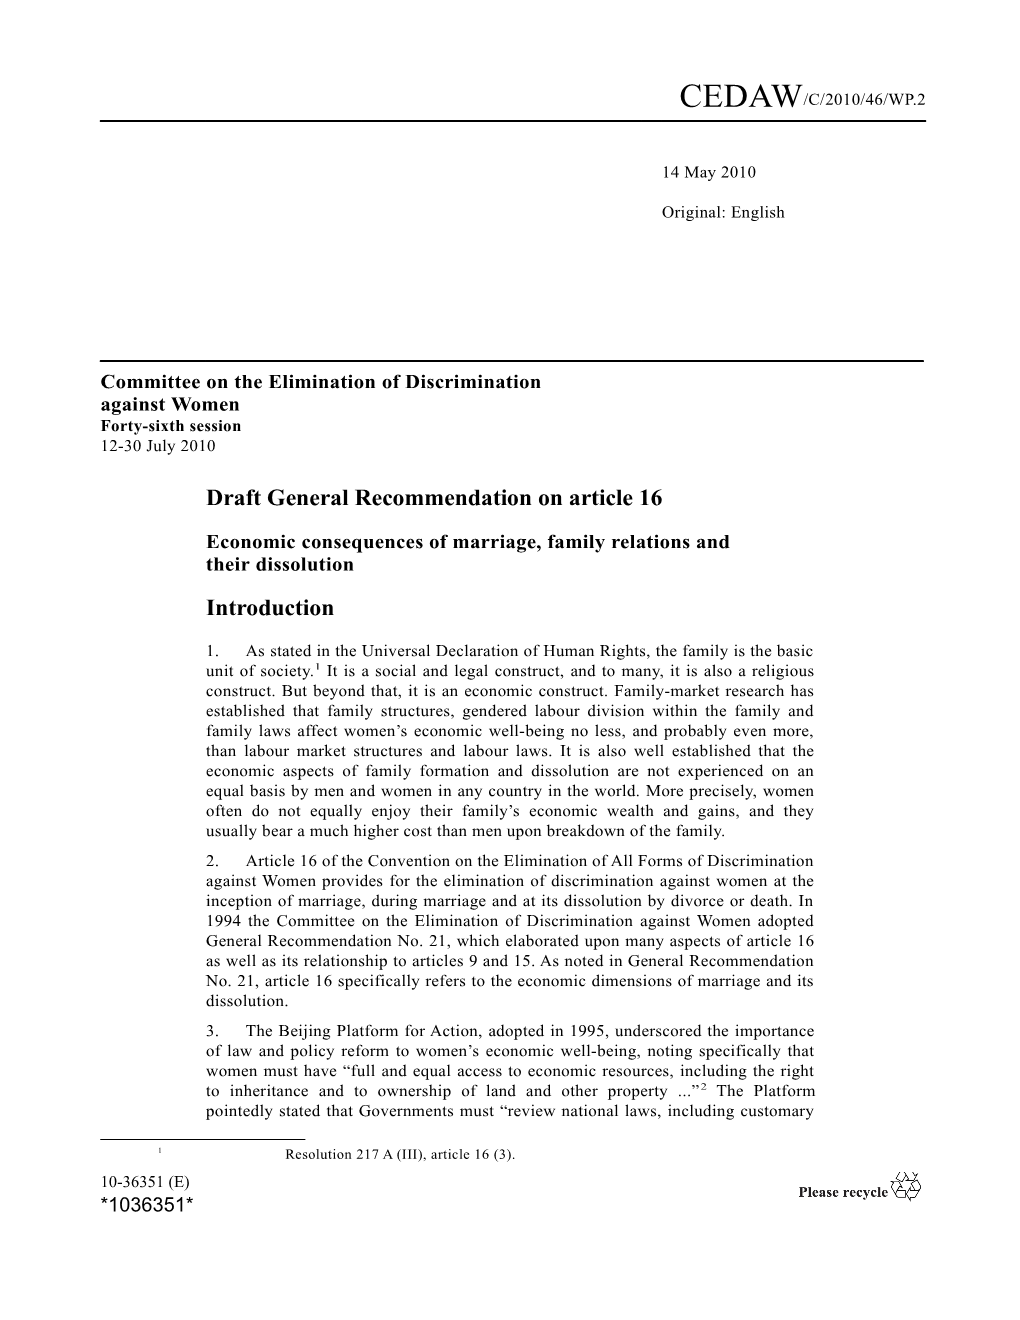 Draft General Recommendation on Article 16